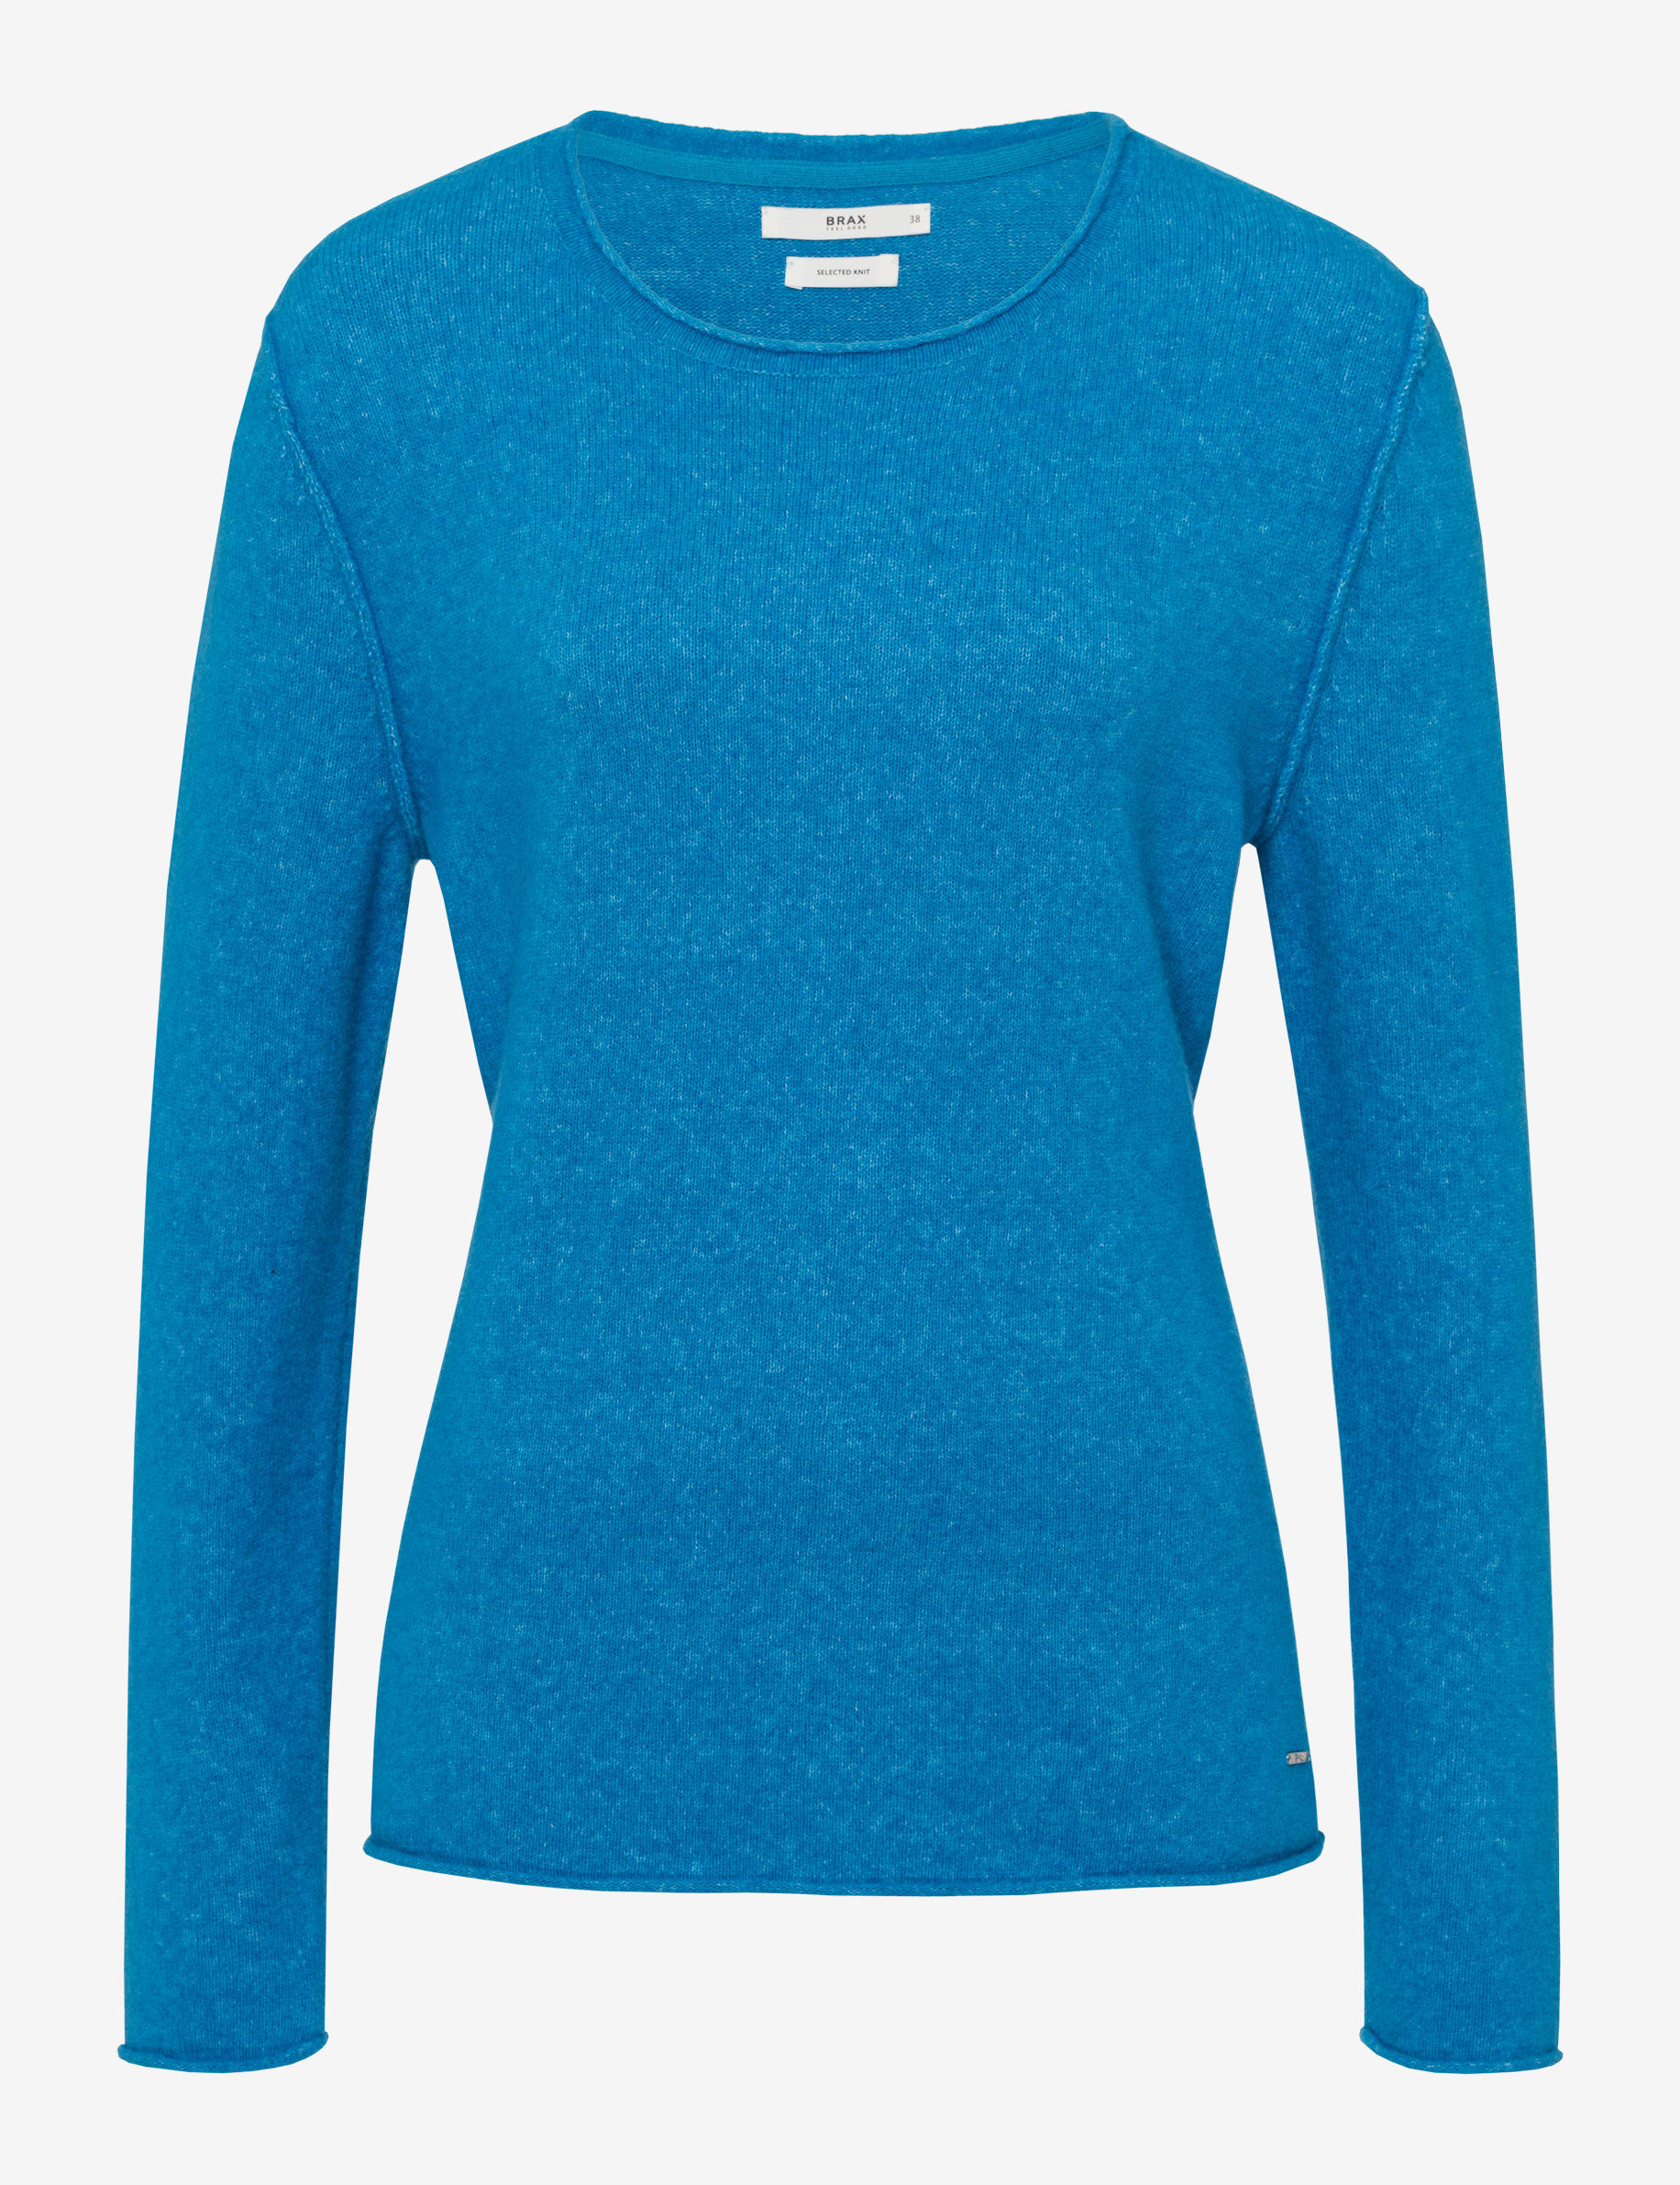 Women Style LESLEY sky blue  Stand-alone front view